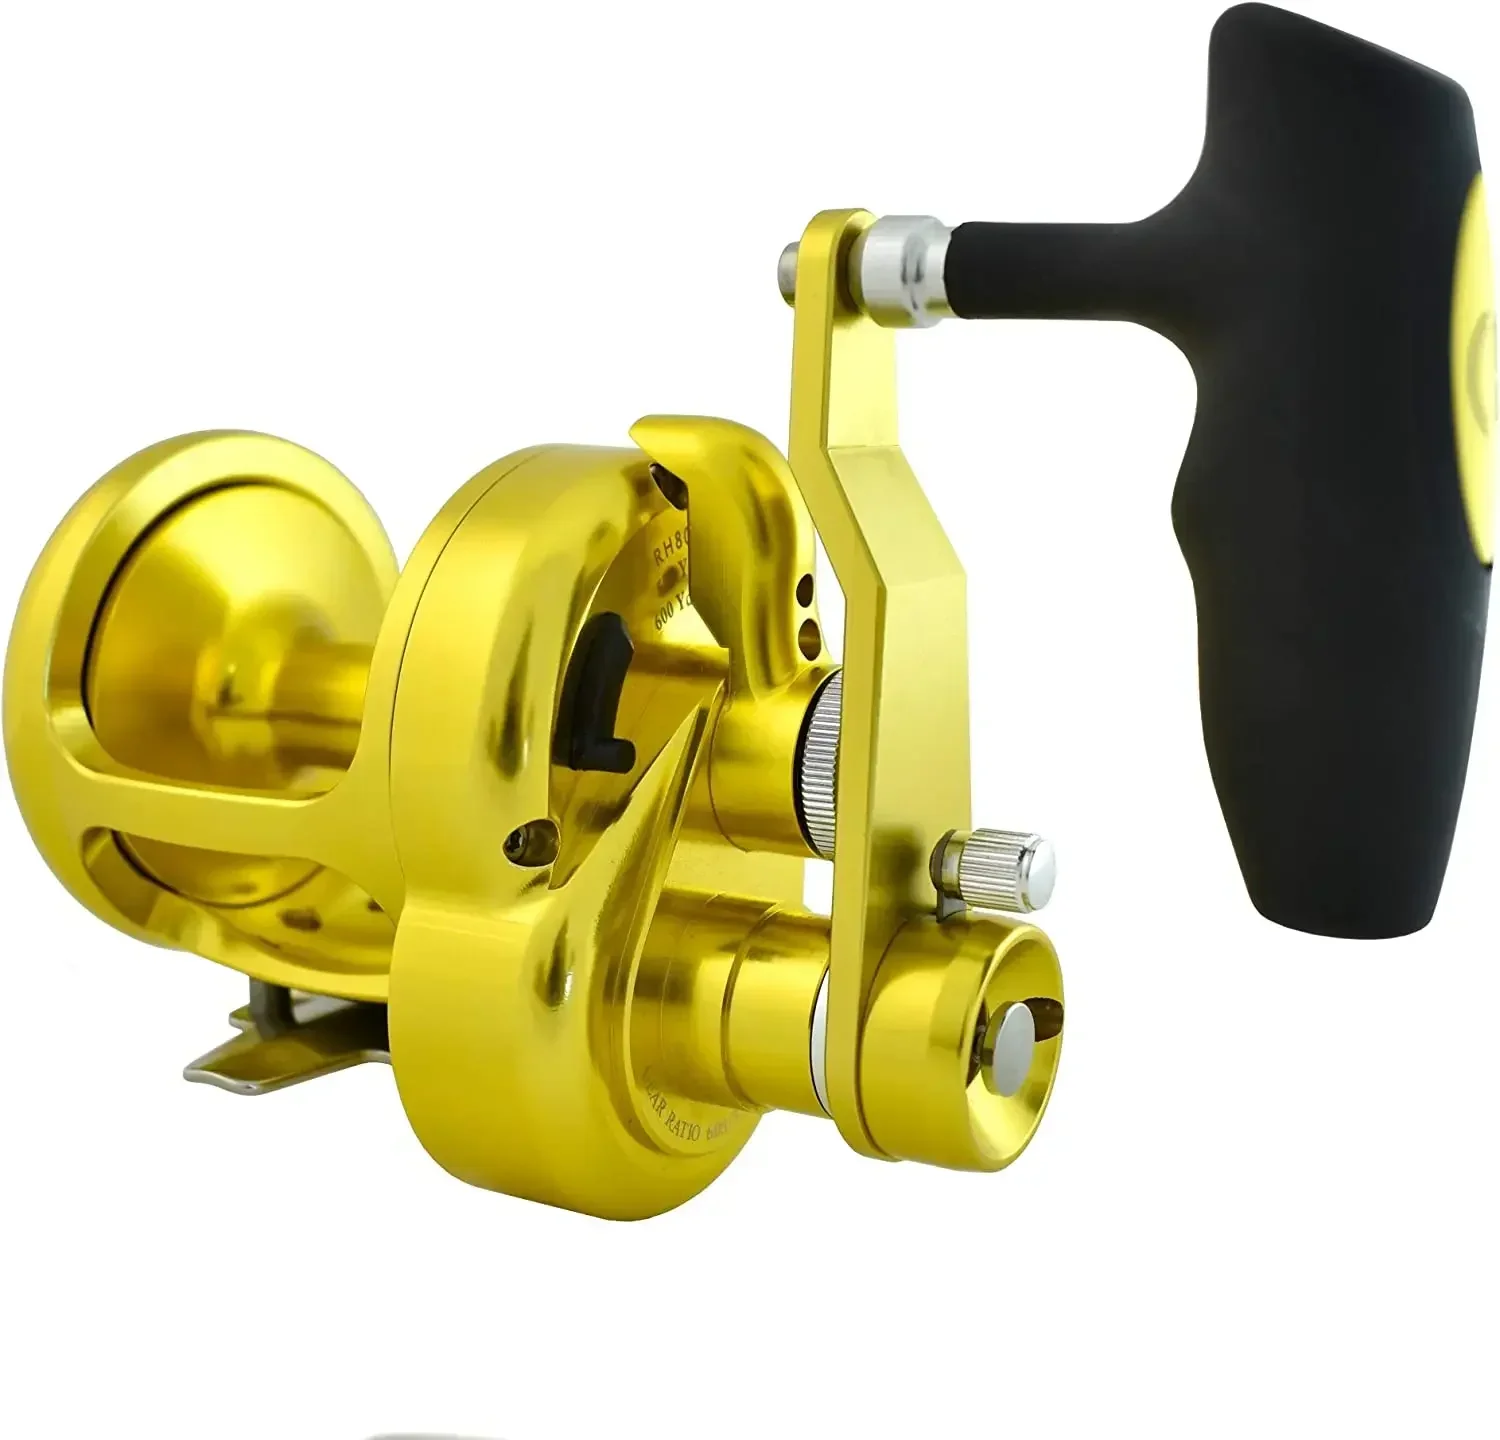 

2022 SUMMER 50% DISCOUNT SALES BUY 10 GET 5 FREE UNIT EatMyTackle 18W 2-Speed Saltwater Fishing Reel | Blue Marlin Tournament Ed